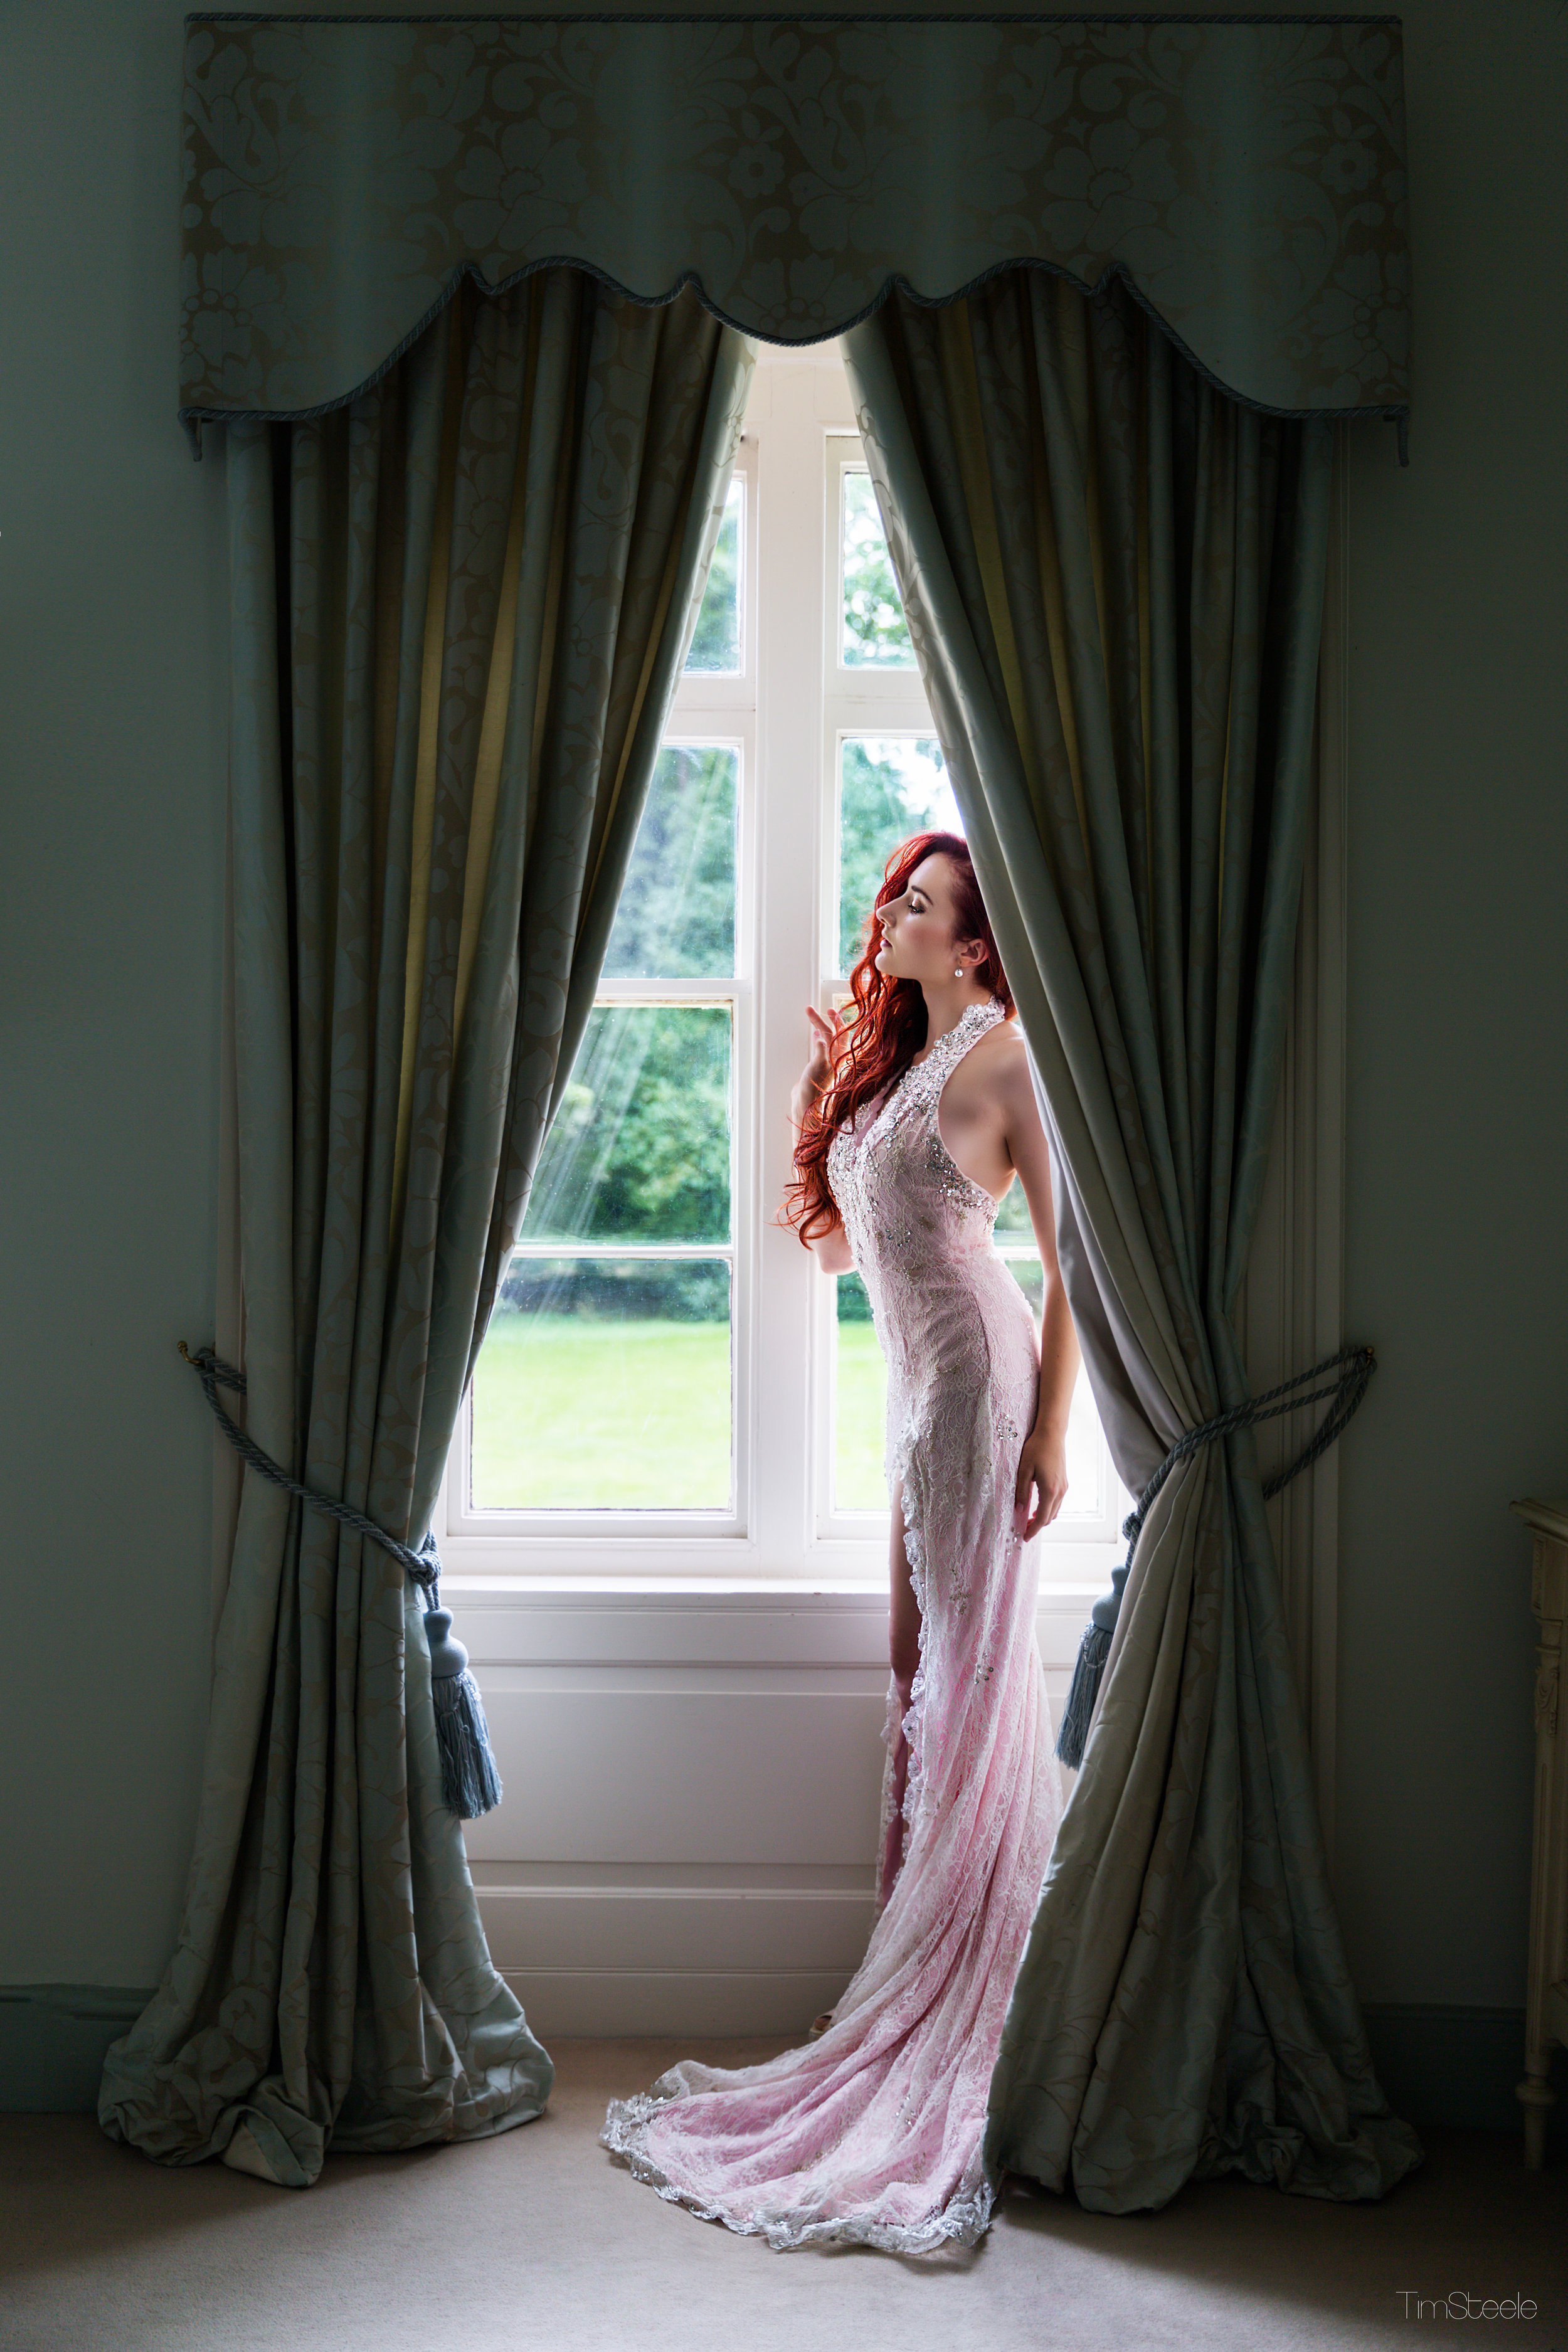  Photographer:  Tim Steele   Location:  Pipewell Hall  